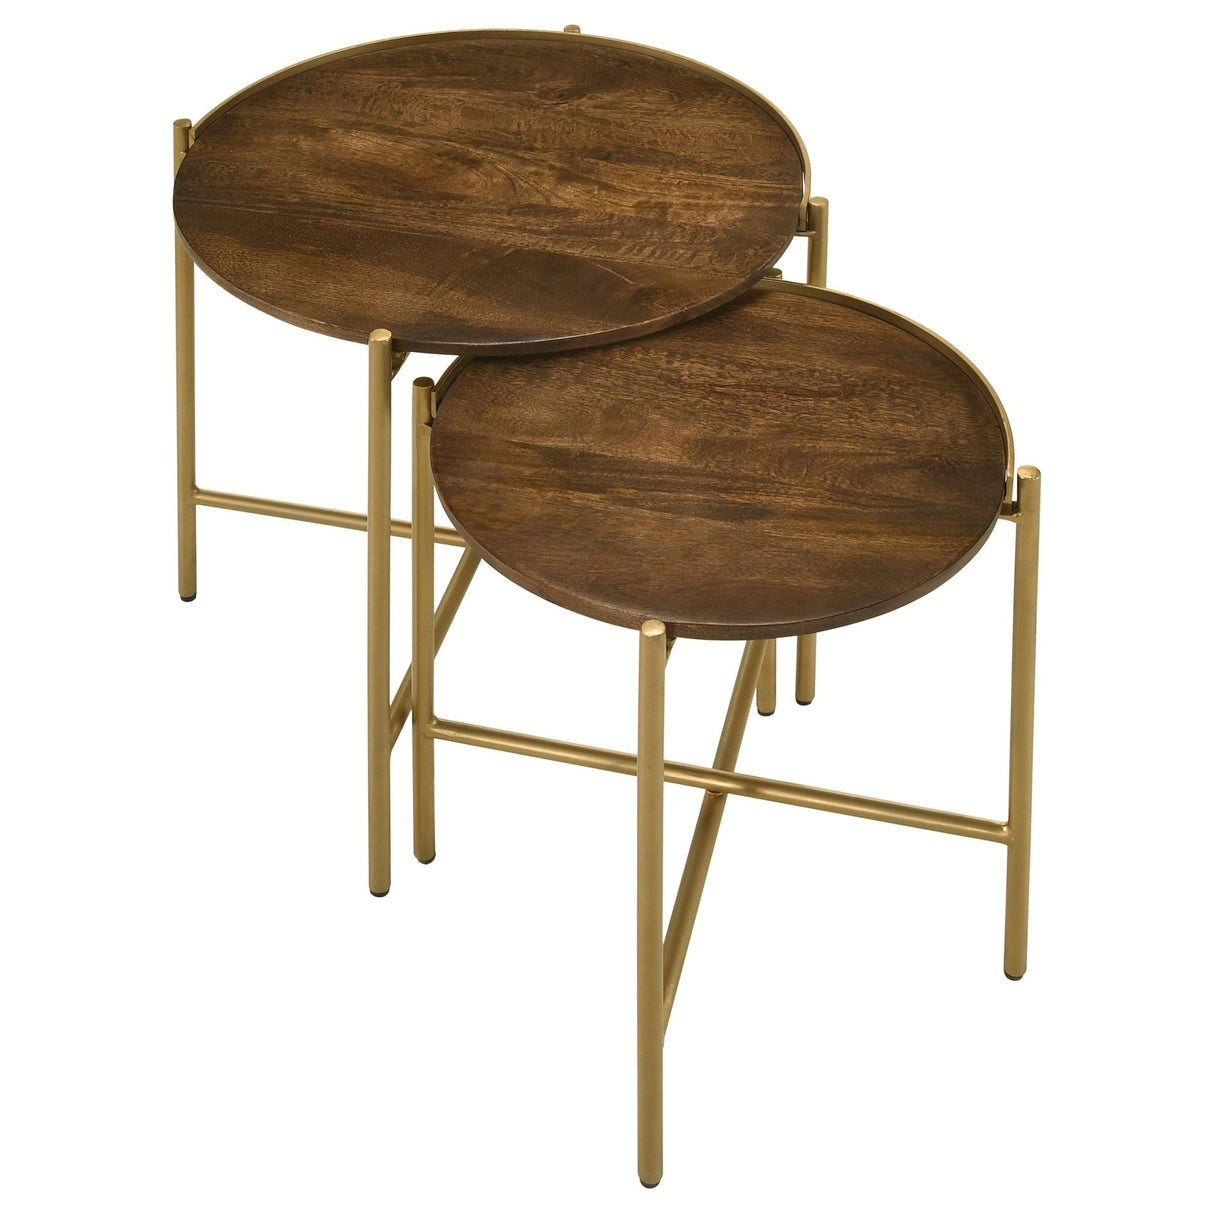 2 Pc Nesting Table - Malka 2-piece Round Nesting Table Dark Brown and Gold